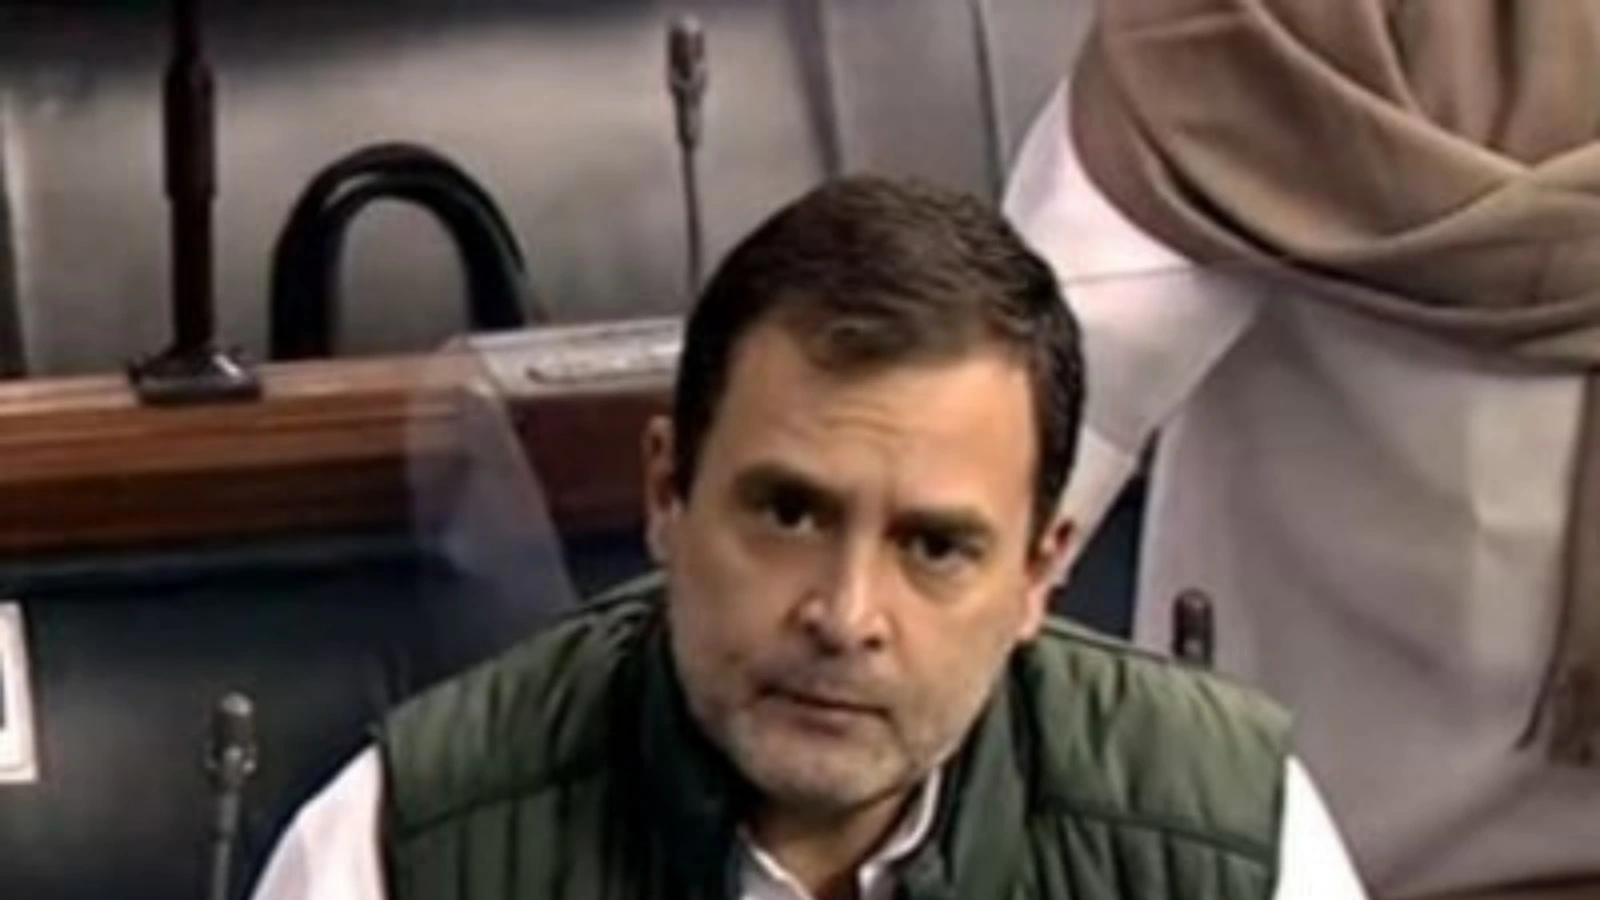 Bombay HC Extends Personal Appearance Relief for Rahul Gandhi in Local Court Till July 28